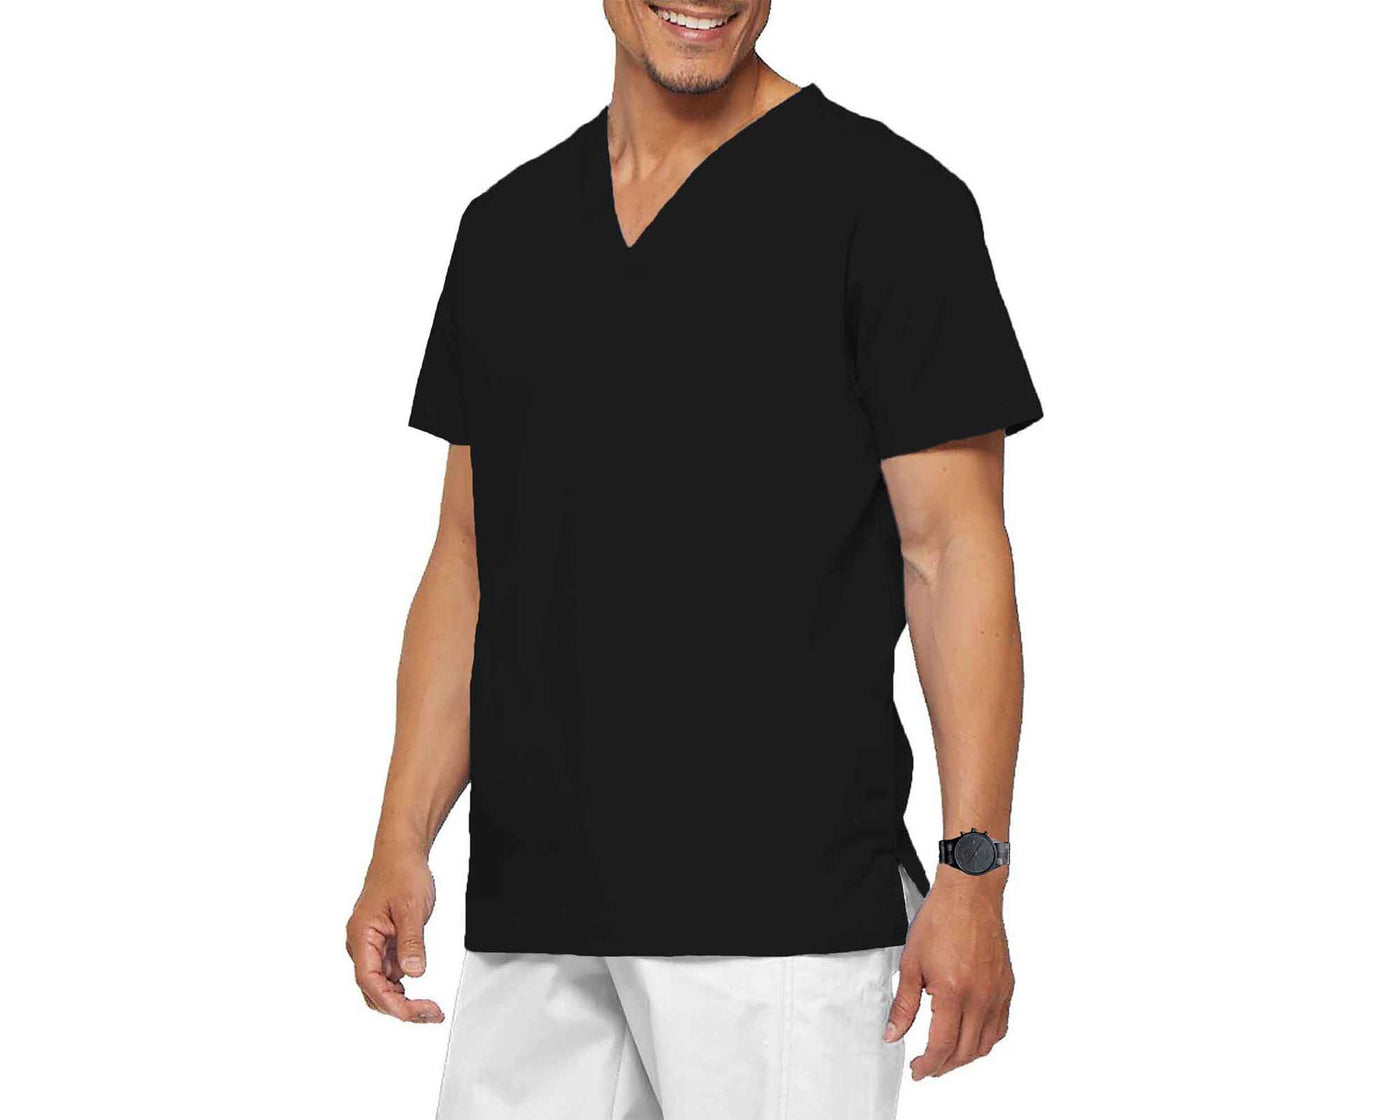 Man wearing black cook shirt in V-neck style with black wrist watch